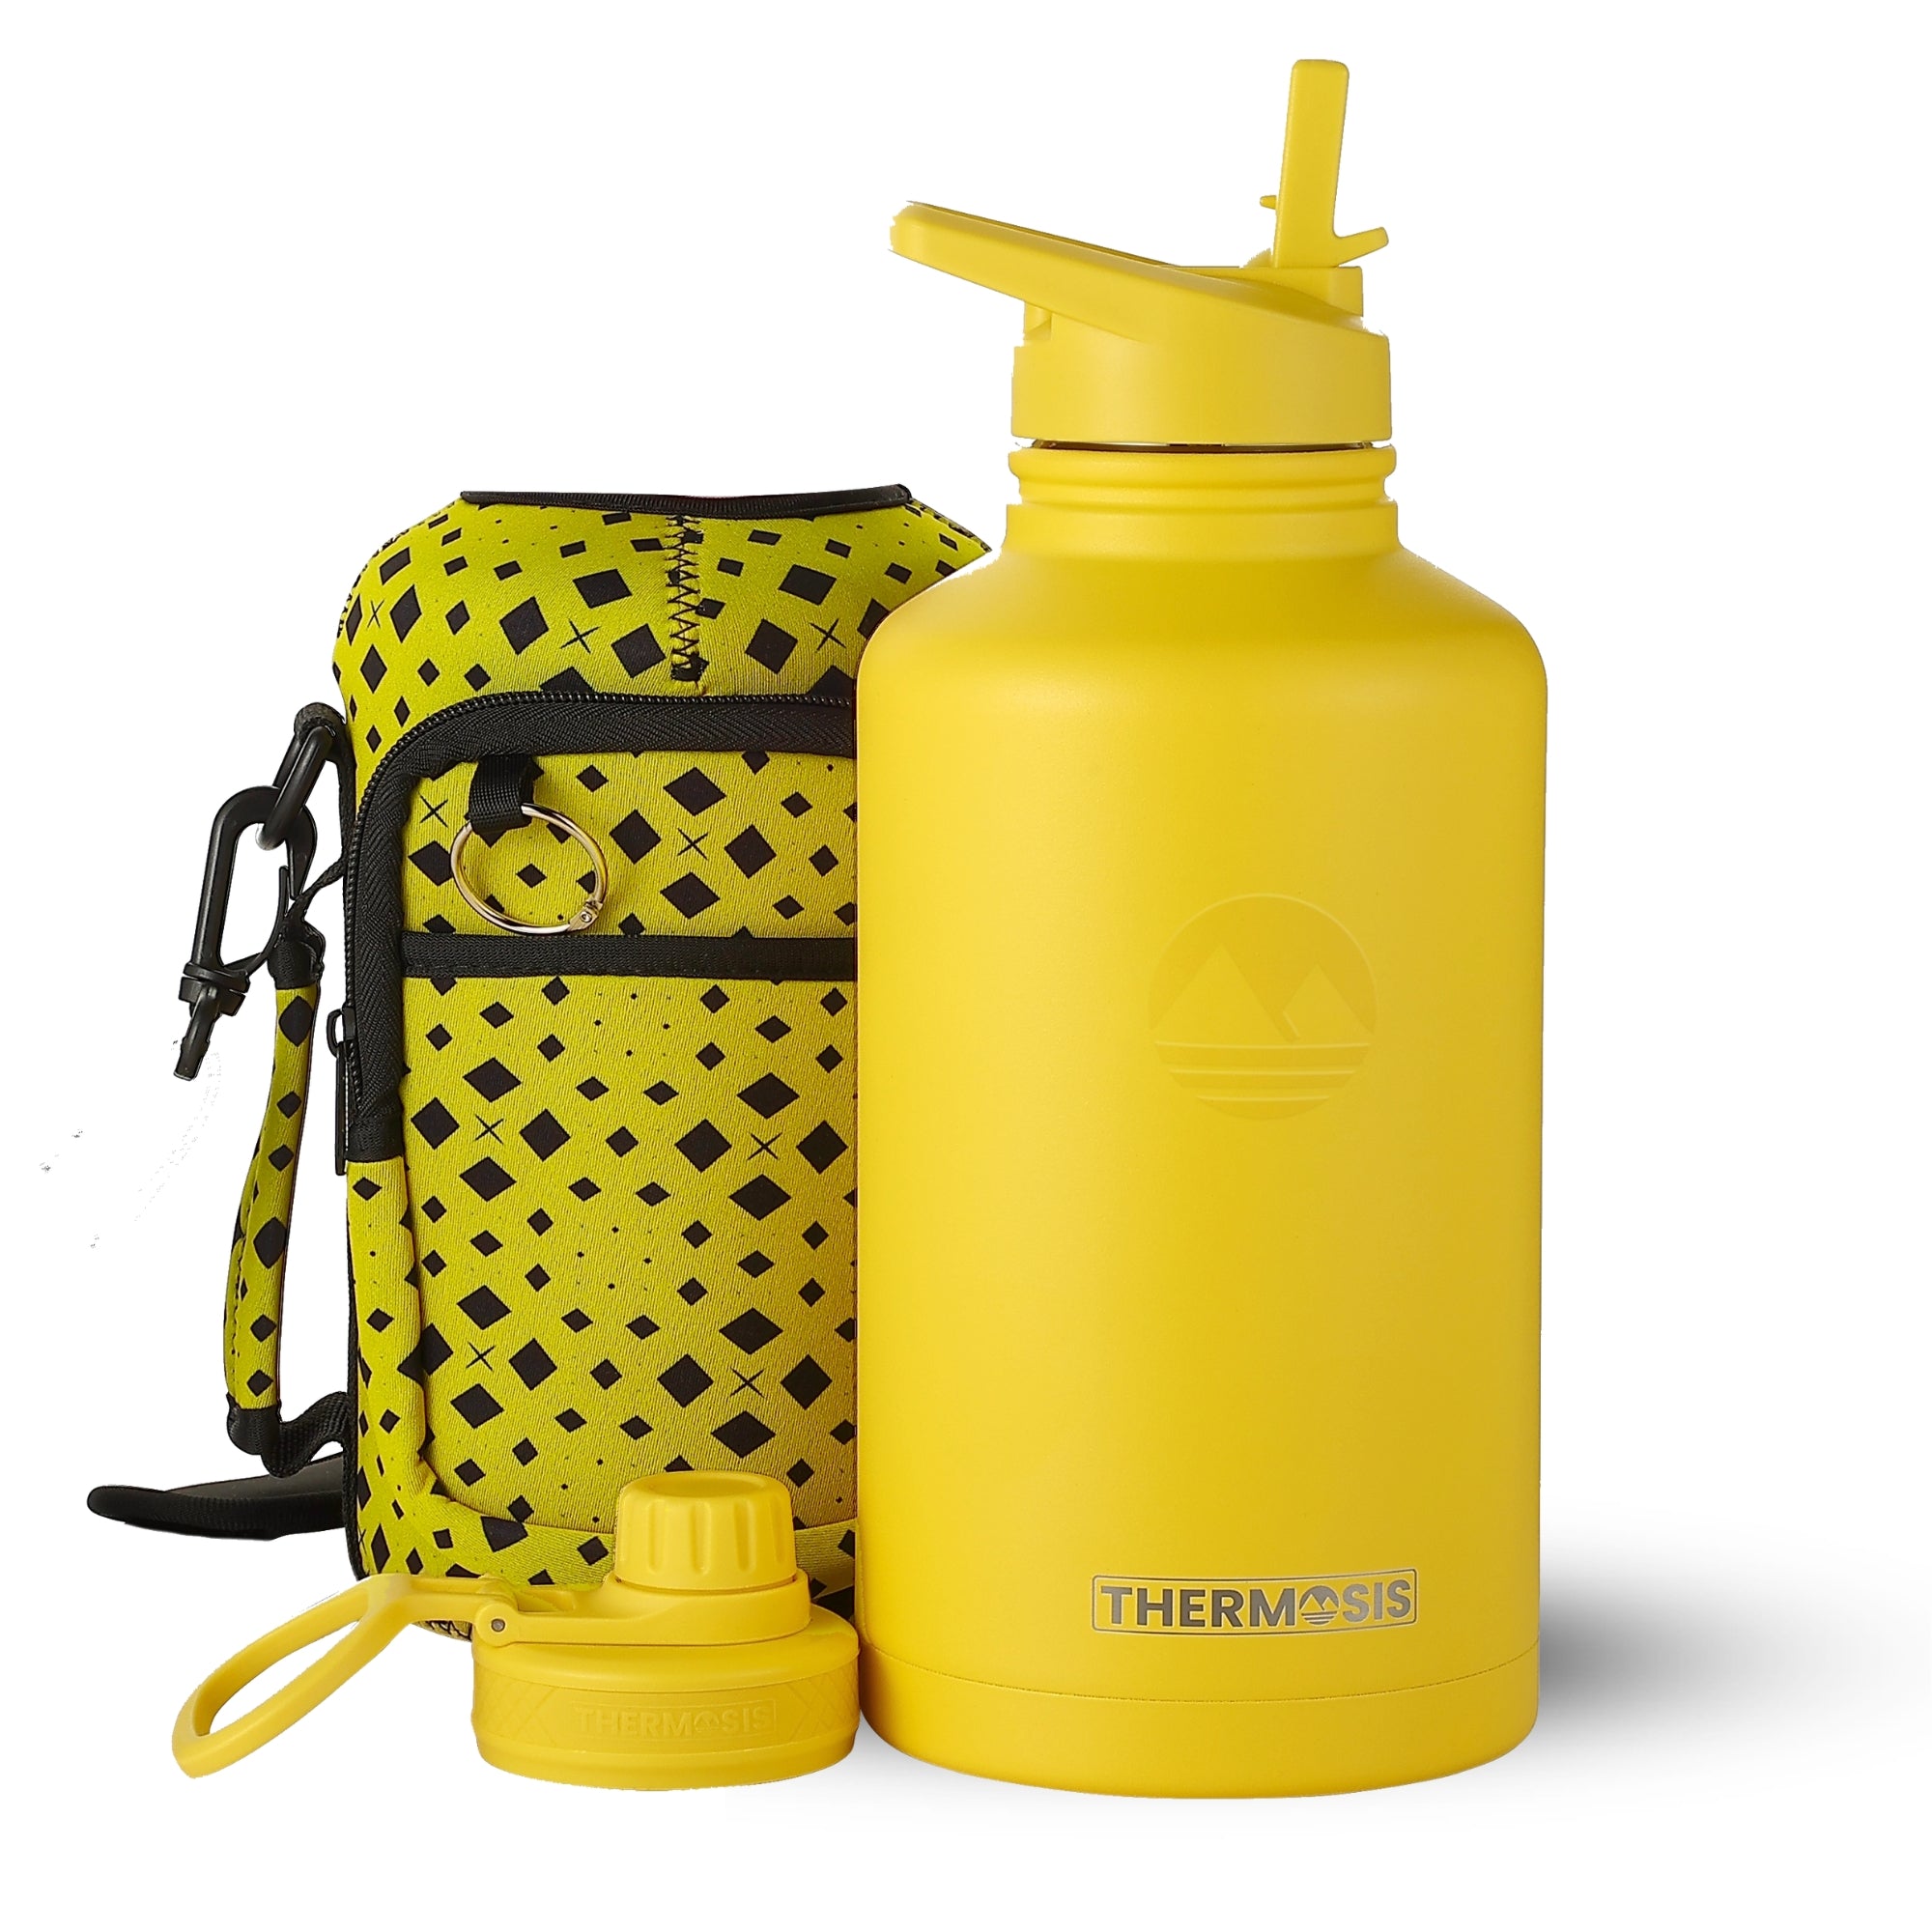 Big Bevi | 64oz Insulated Water Bottle name=